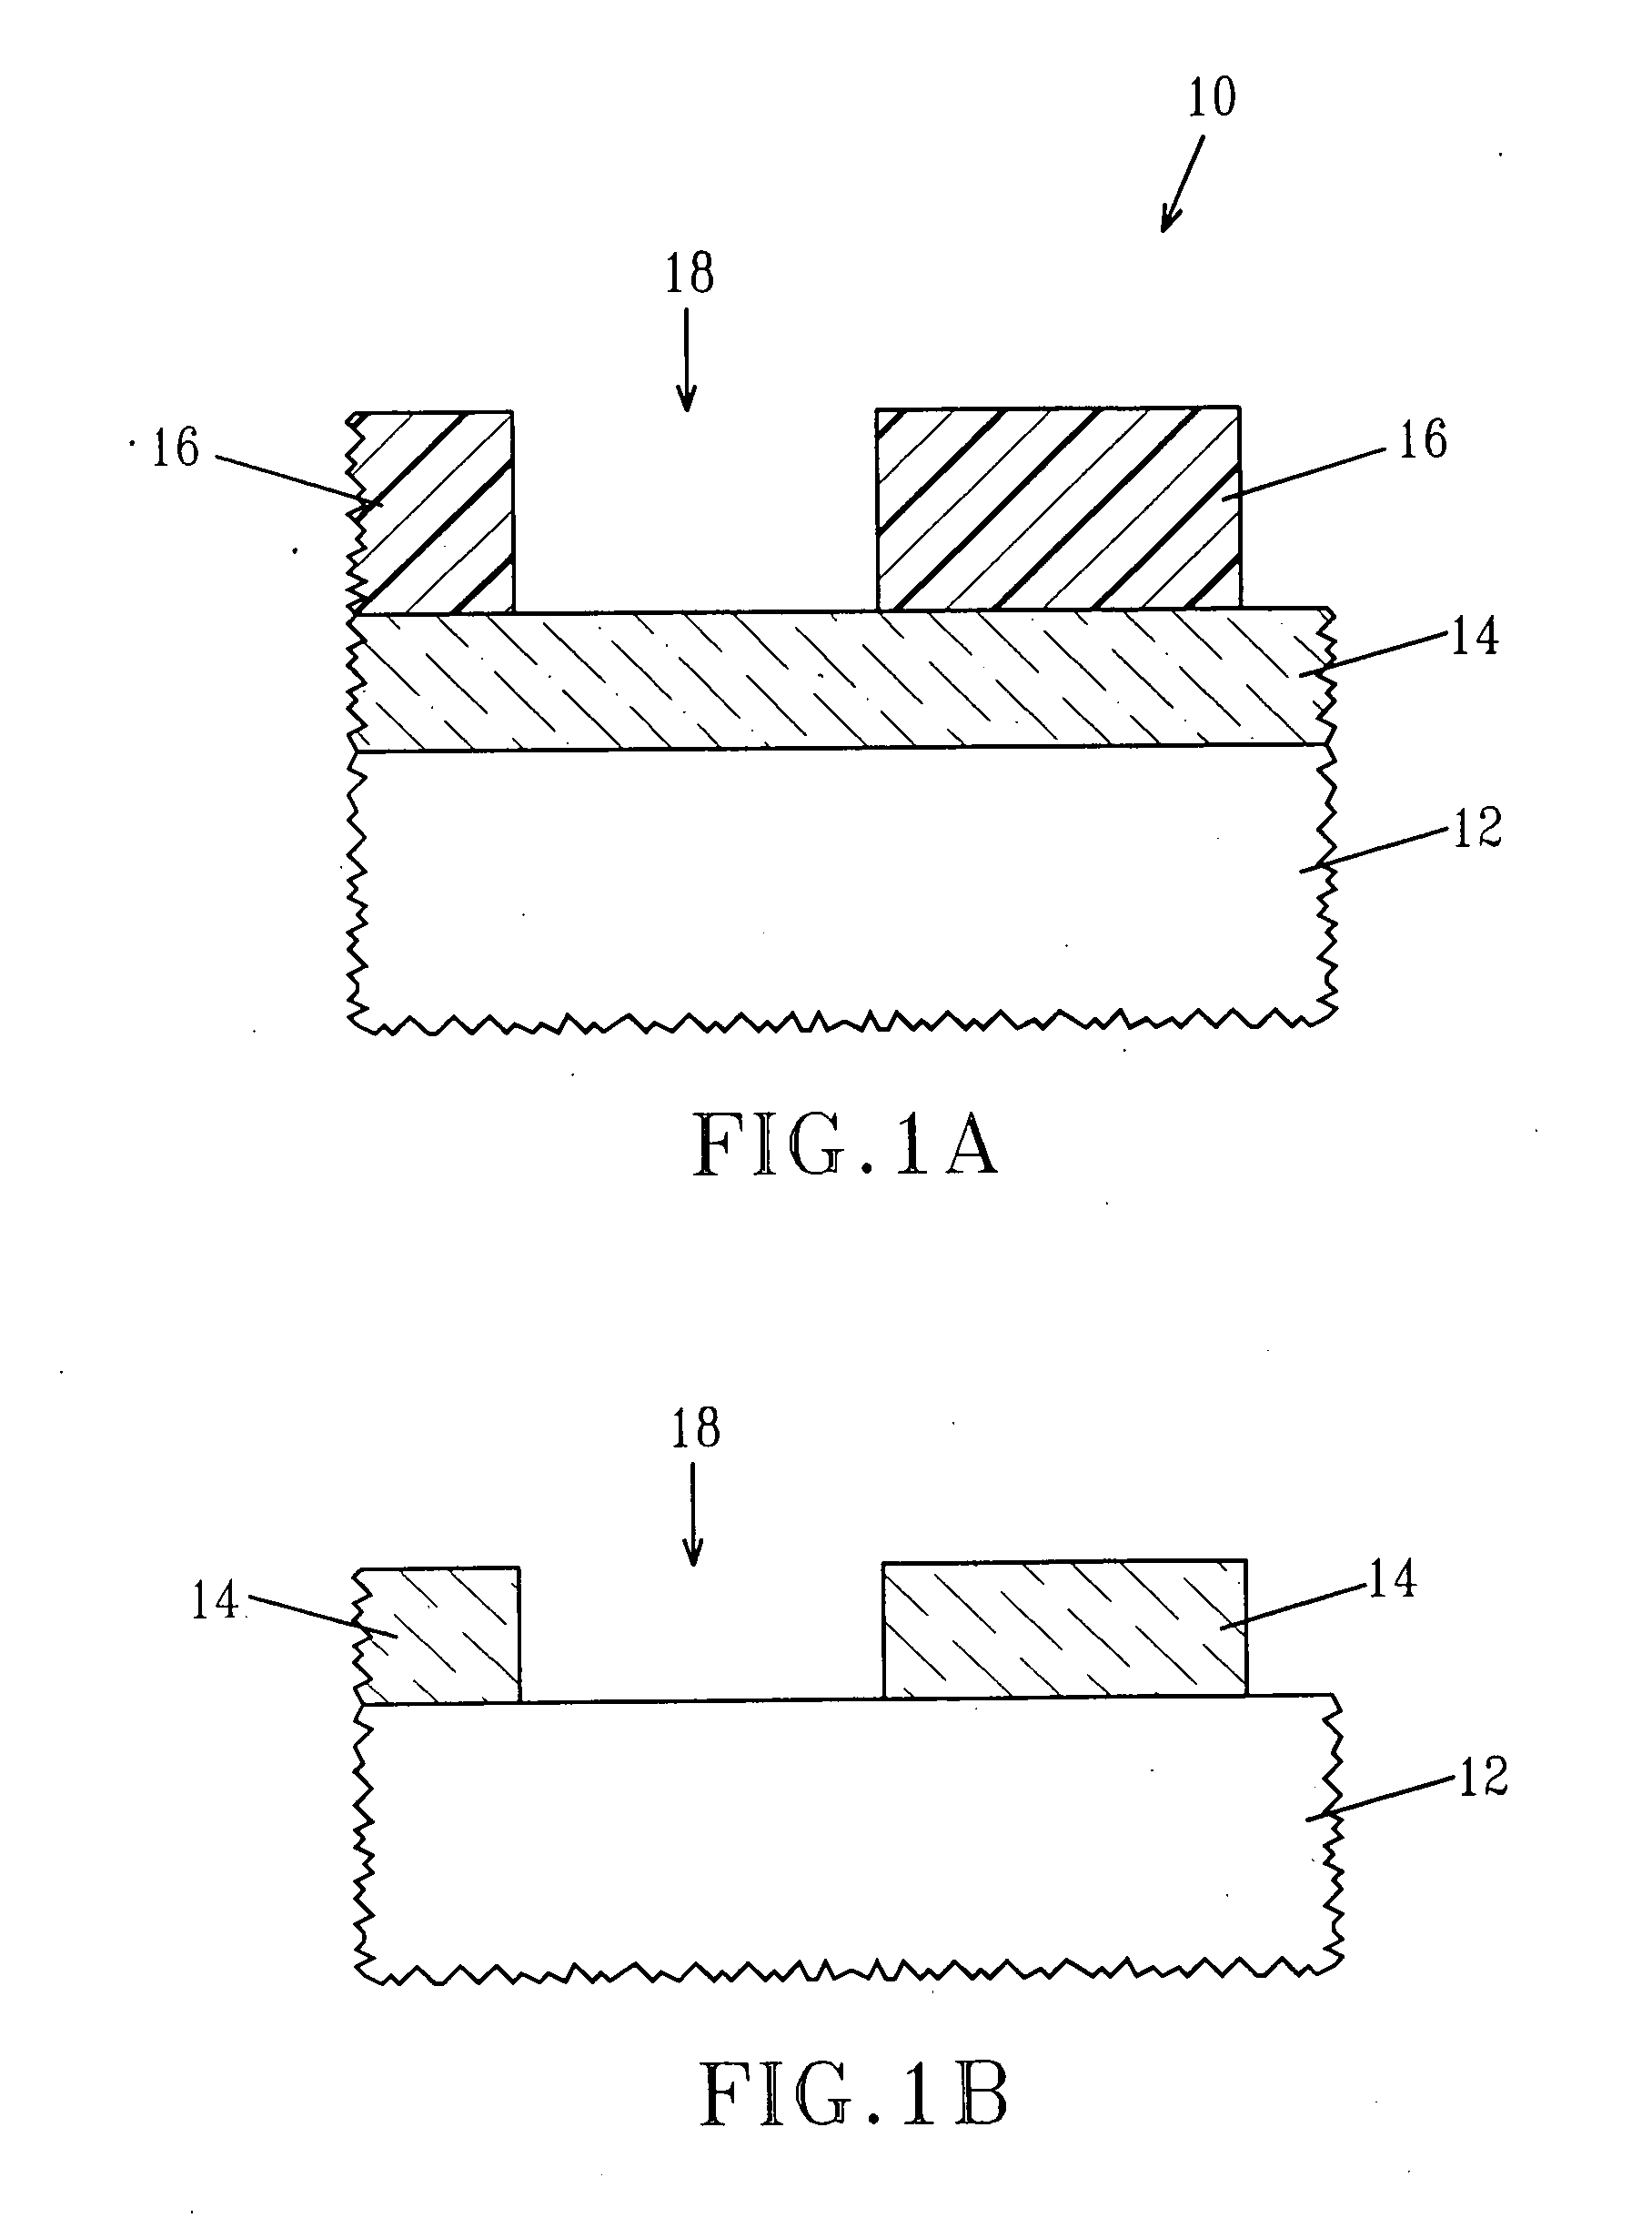 Patterning SOI with silicon mask to create box at different depths